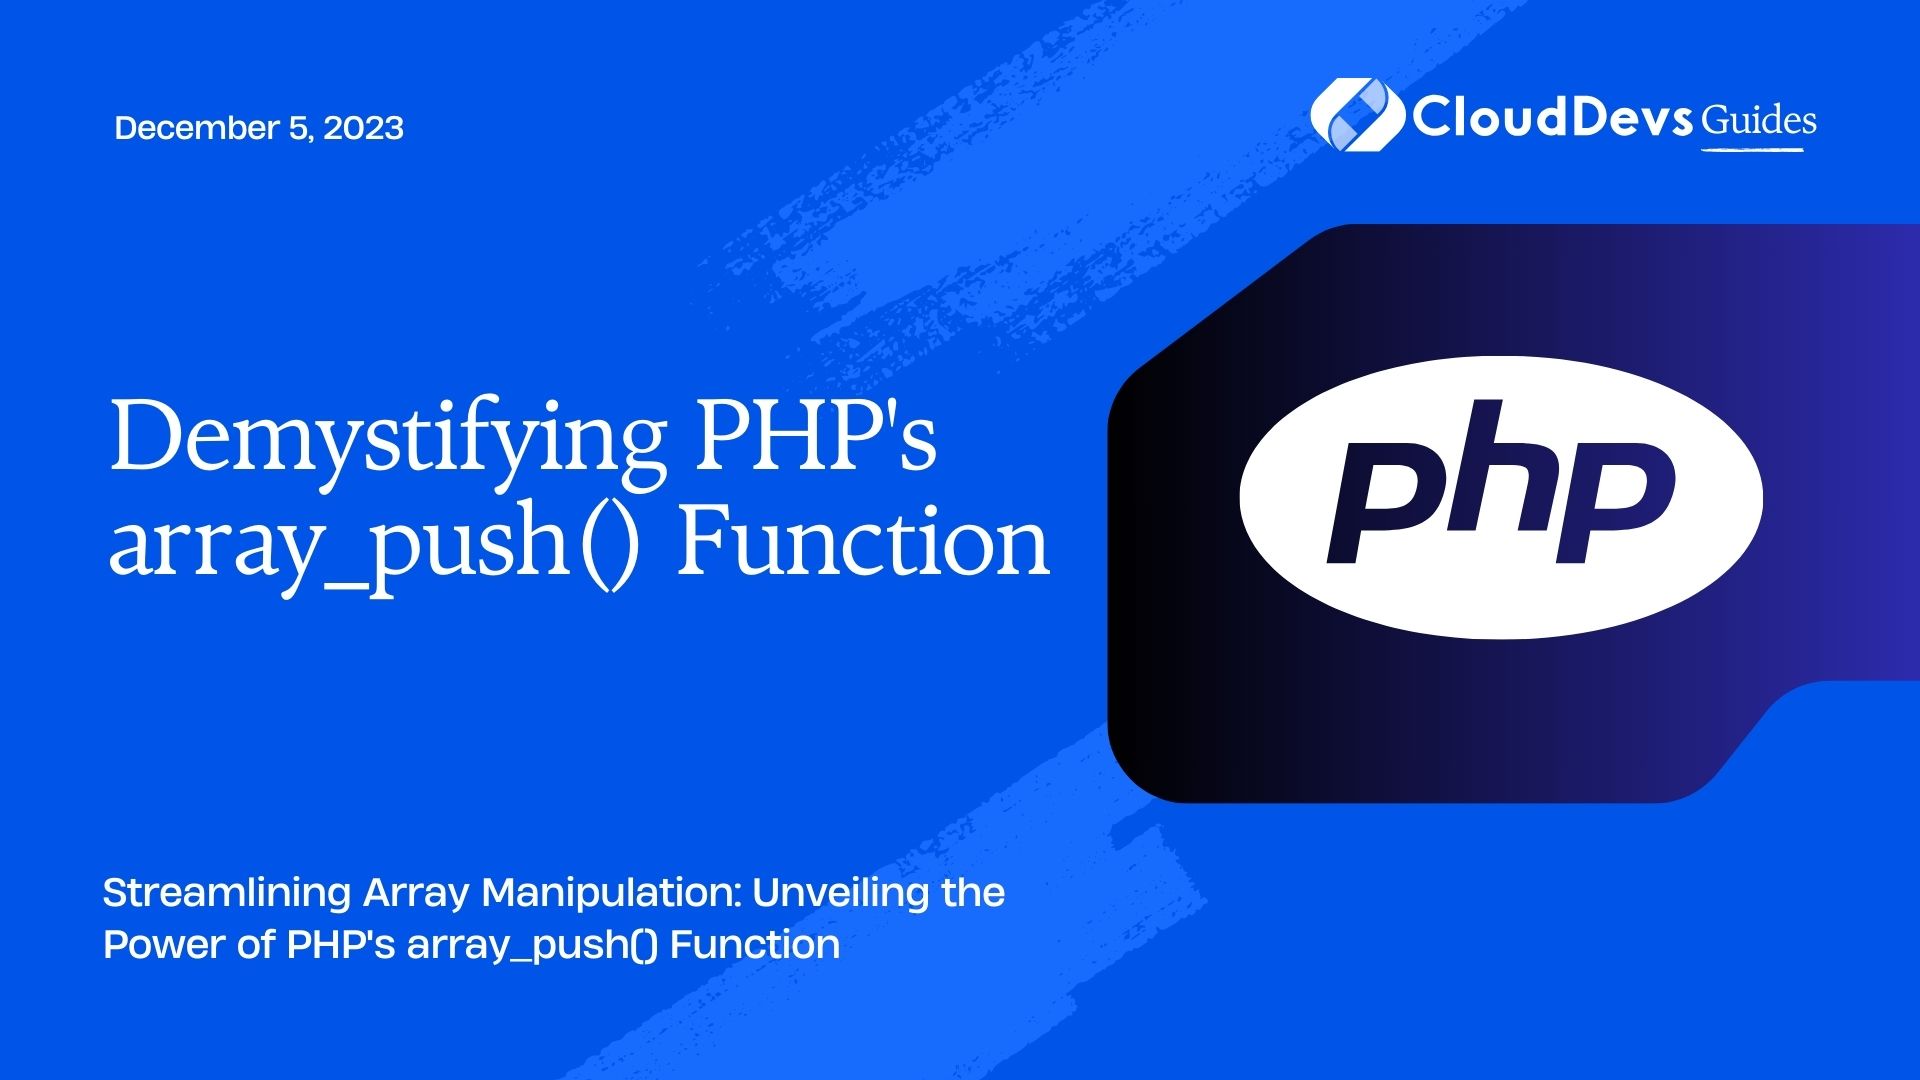 Demystifying PHP's array_push() Function